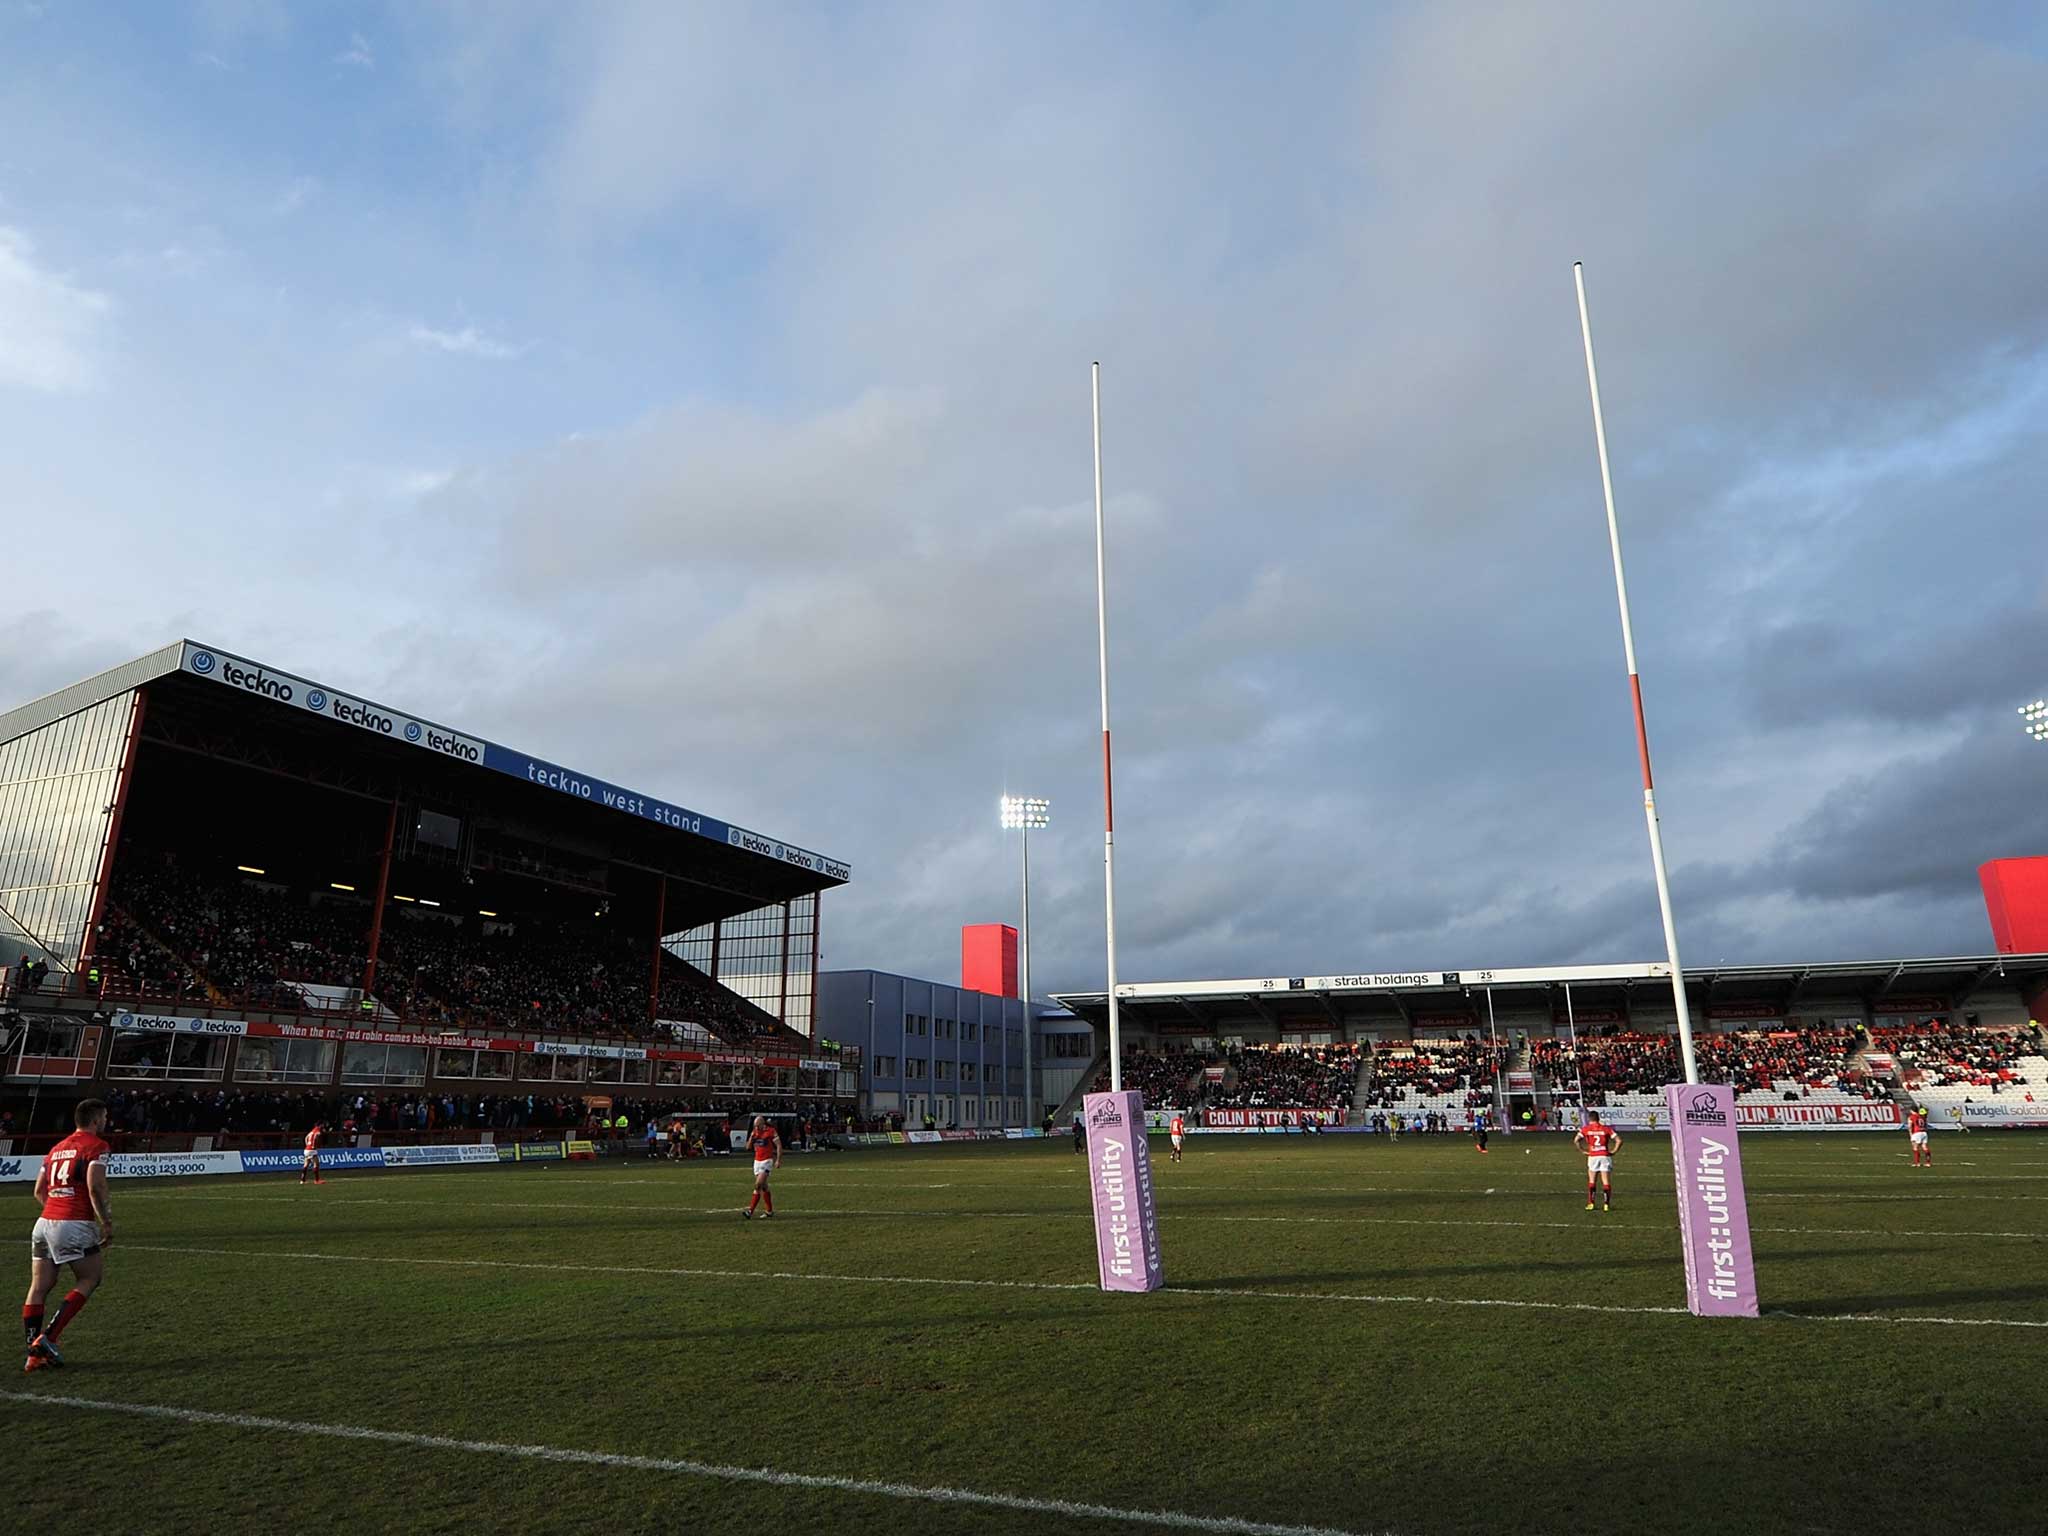 Hull KR will be investigated after violence brewed following their match this weekend